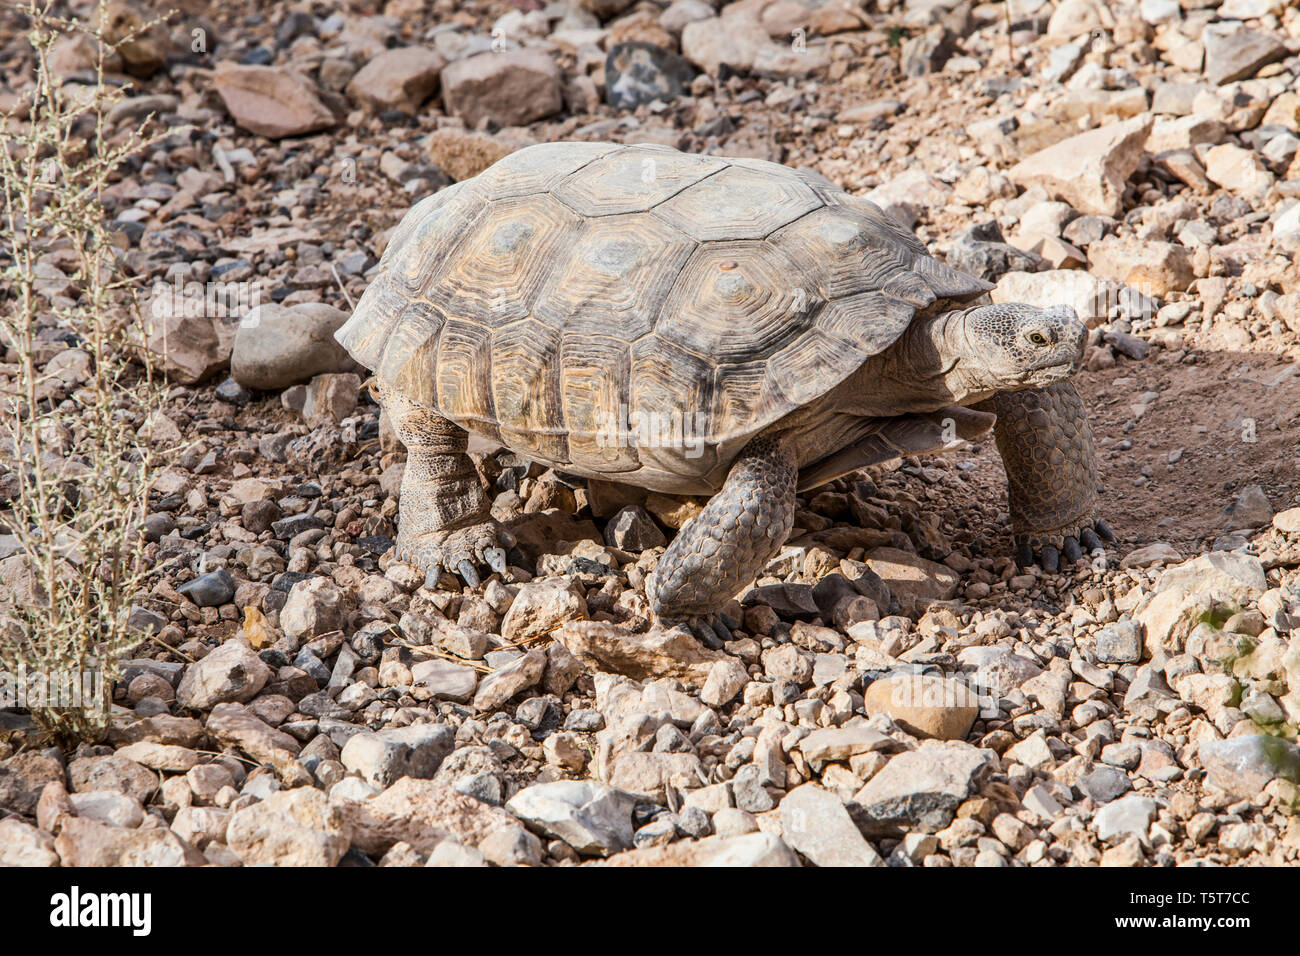 A desert tortoise at the interpretive center, Red Rock Canyons Conservation Area, Nevada, USA Stock Photo